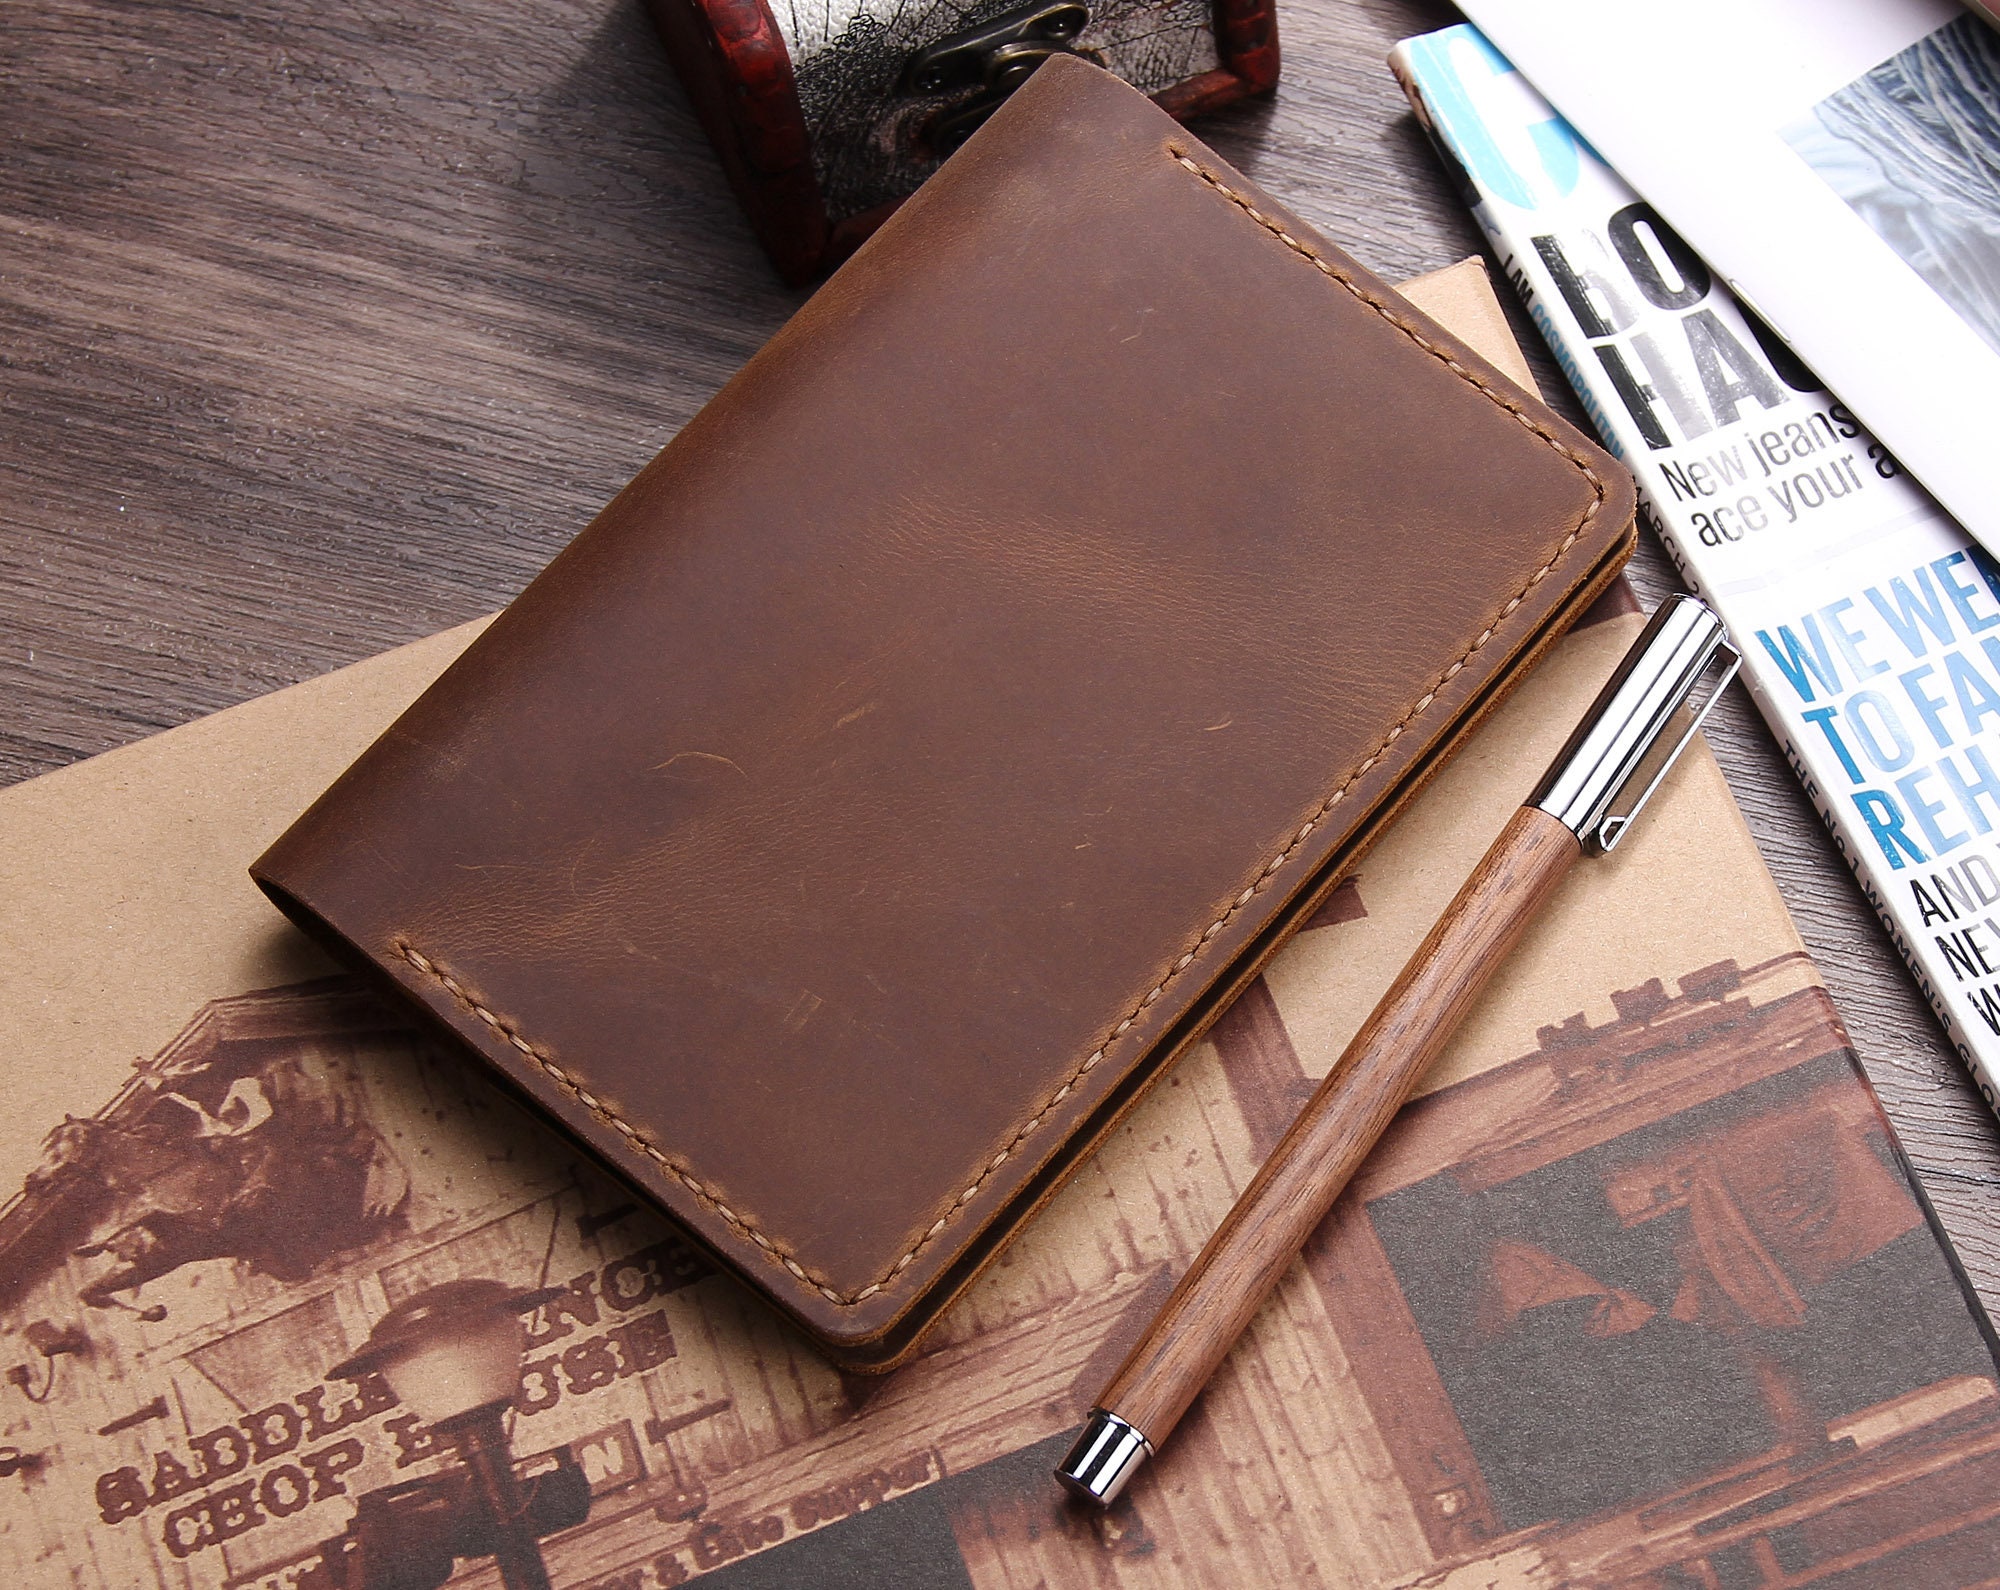 Original Field Notes 3 Pack / Old Church Works - Leather Notebook Covers -  Leather Notebook Covers for a5 Moleskine Journals and Field Notes Notebooks